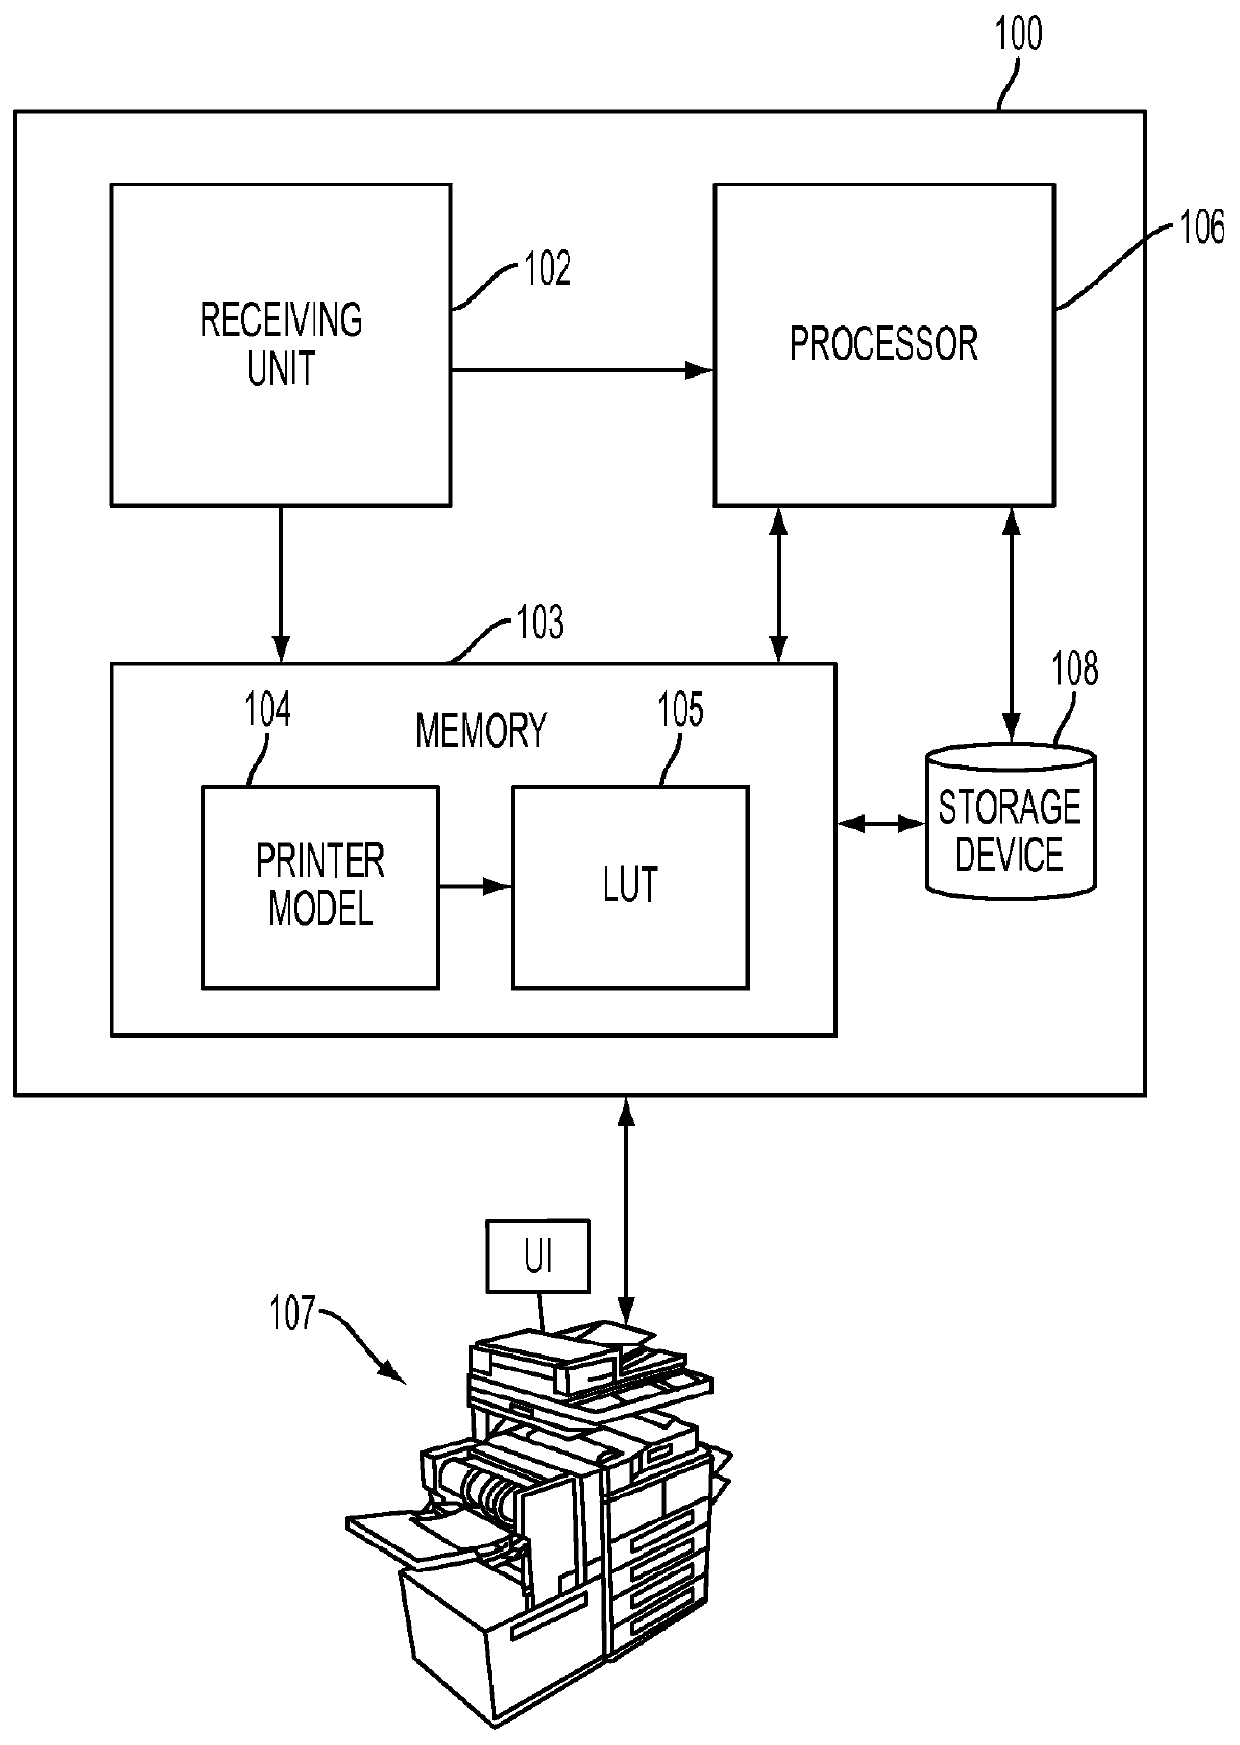 Compensating for print engine change in a document reproduction device